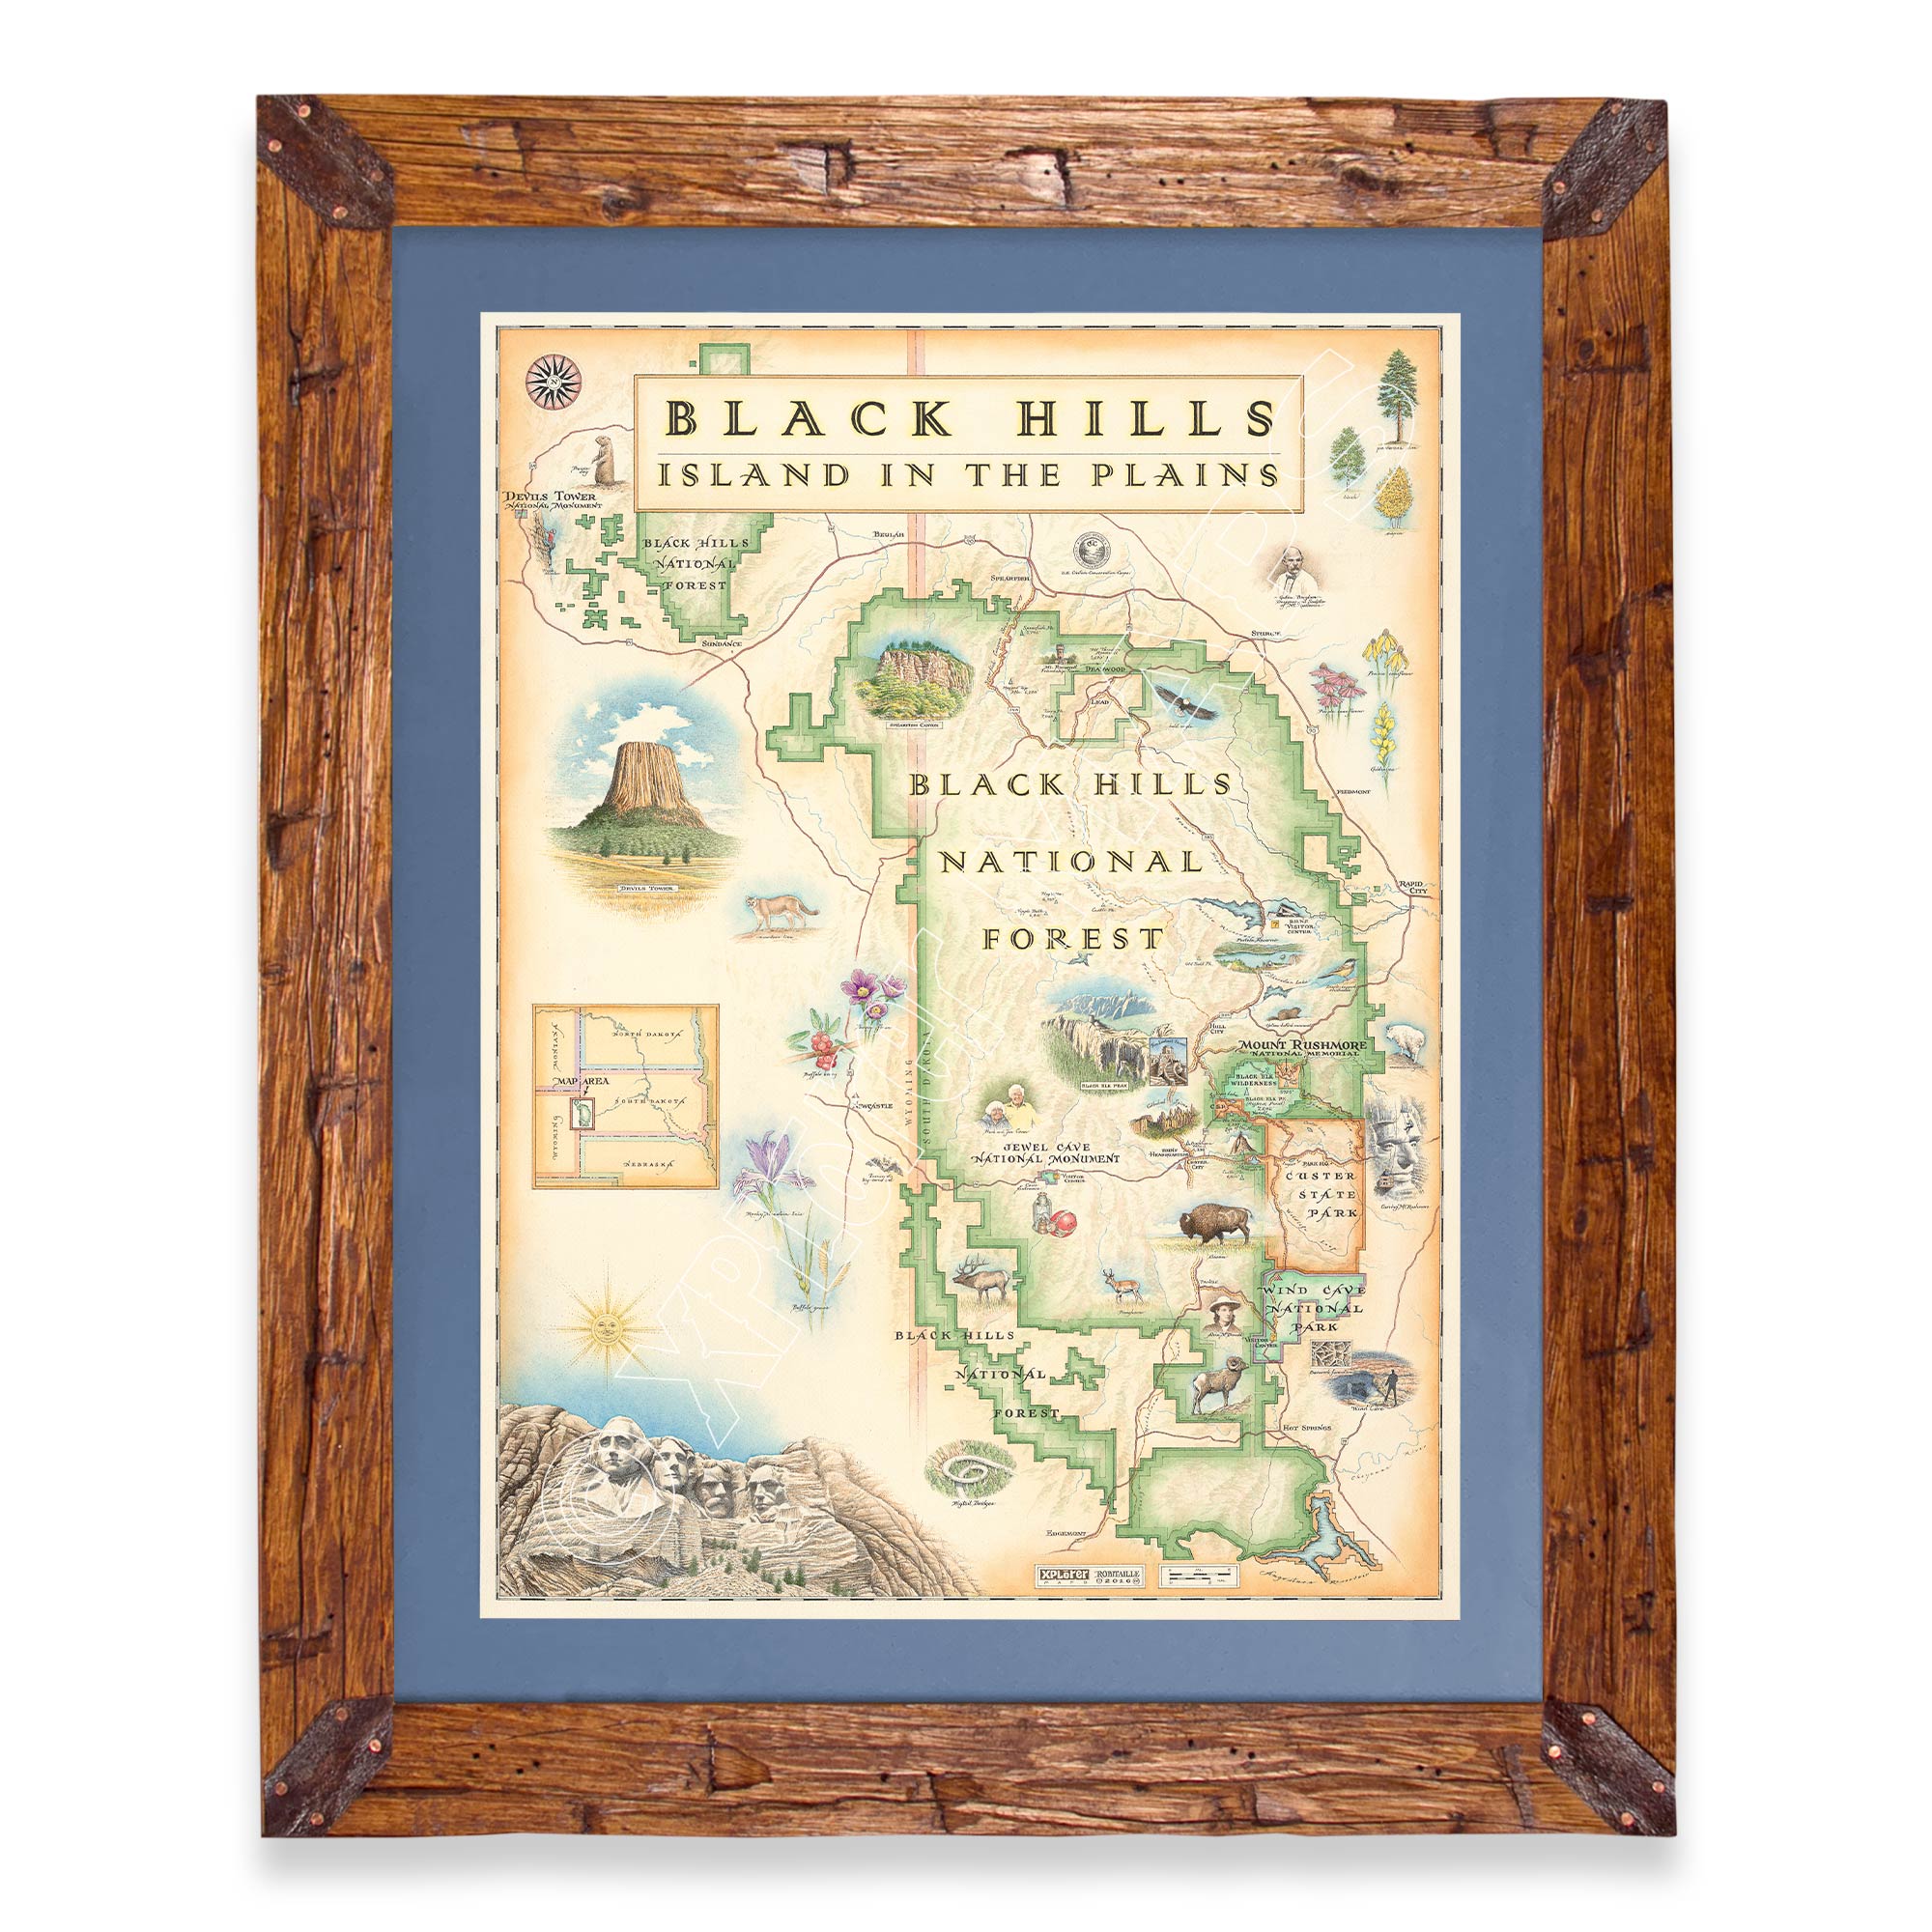 Black Hills National Forest hand-drawn map in a Montana hand-scraped pine wood frame with blue mat.